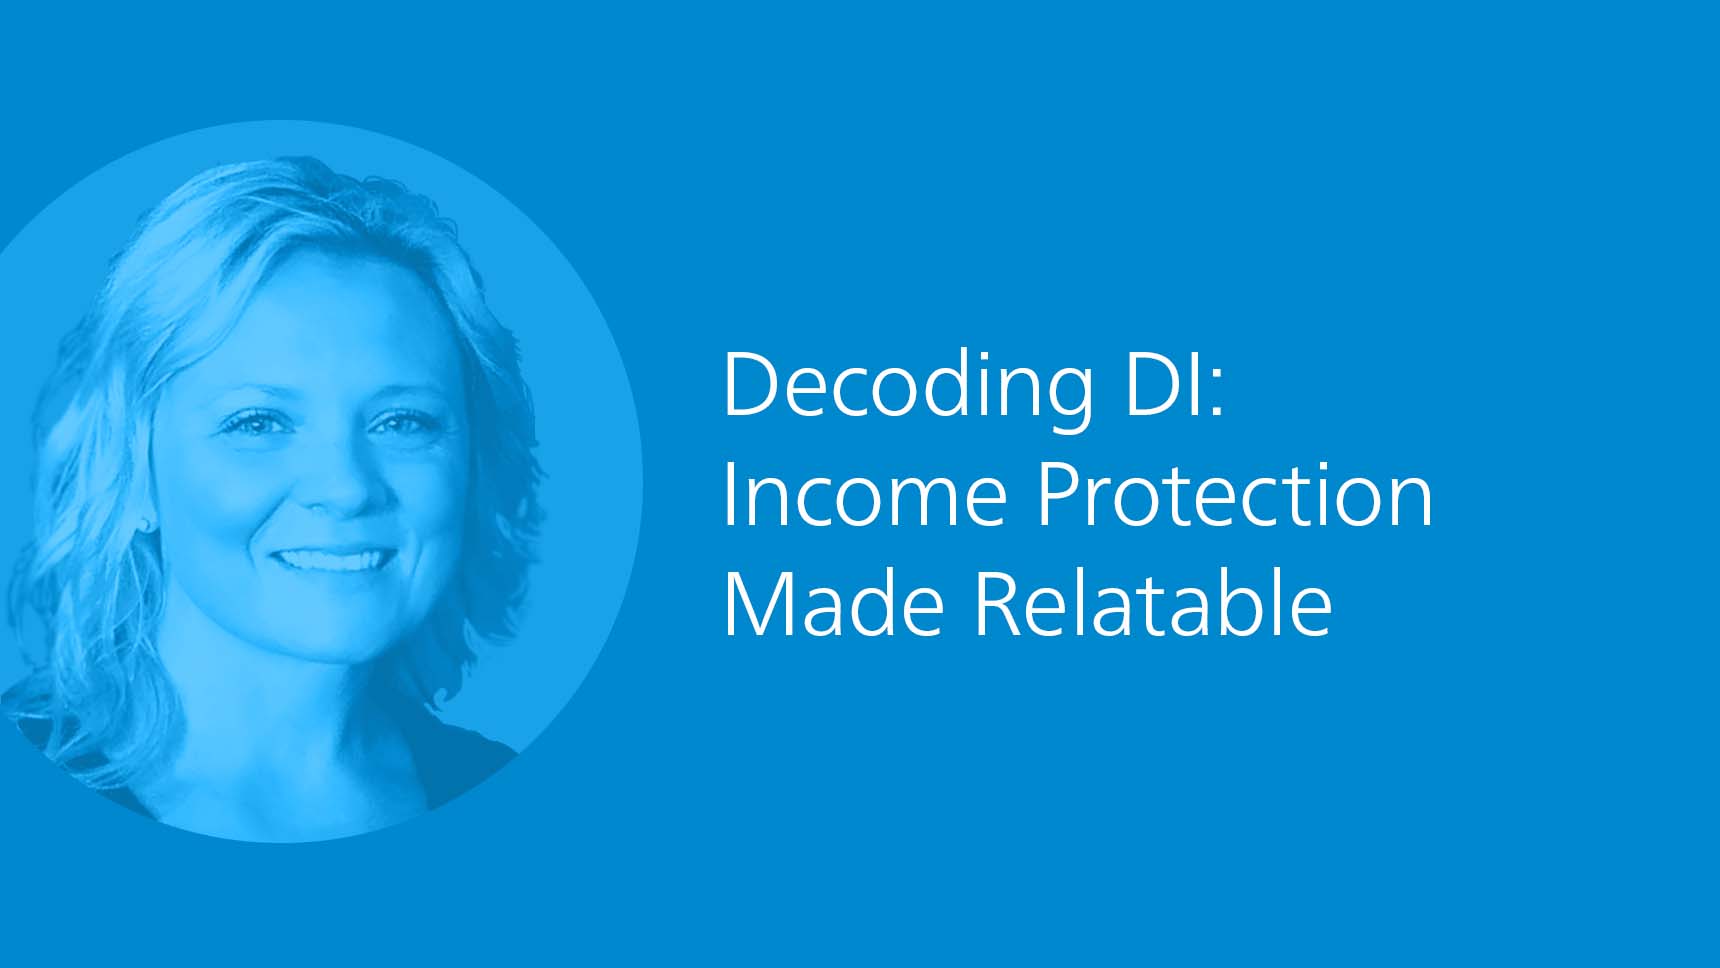  Decoding DI: Income Protection Made Relatable